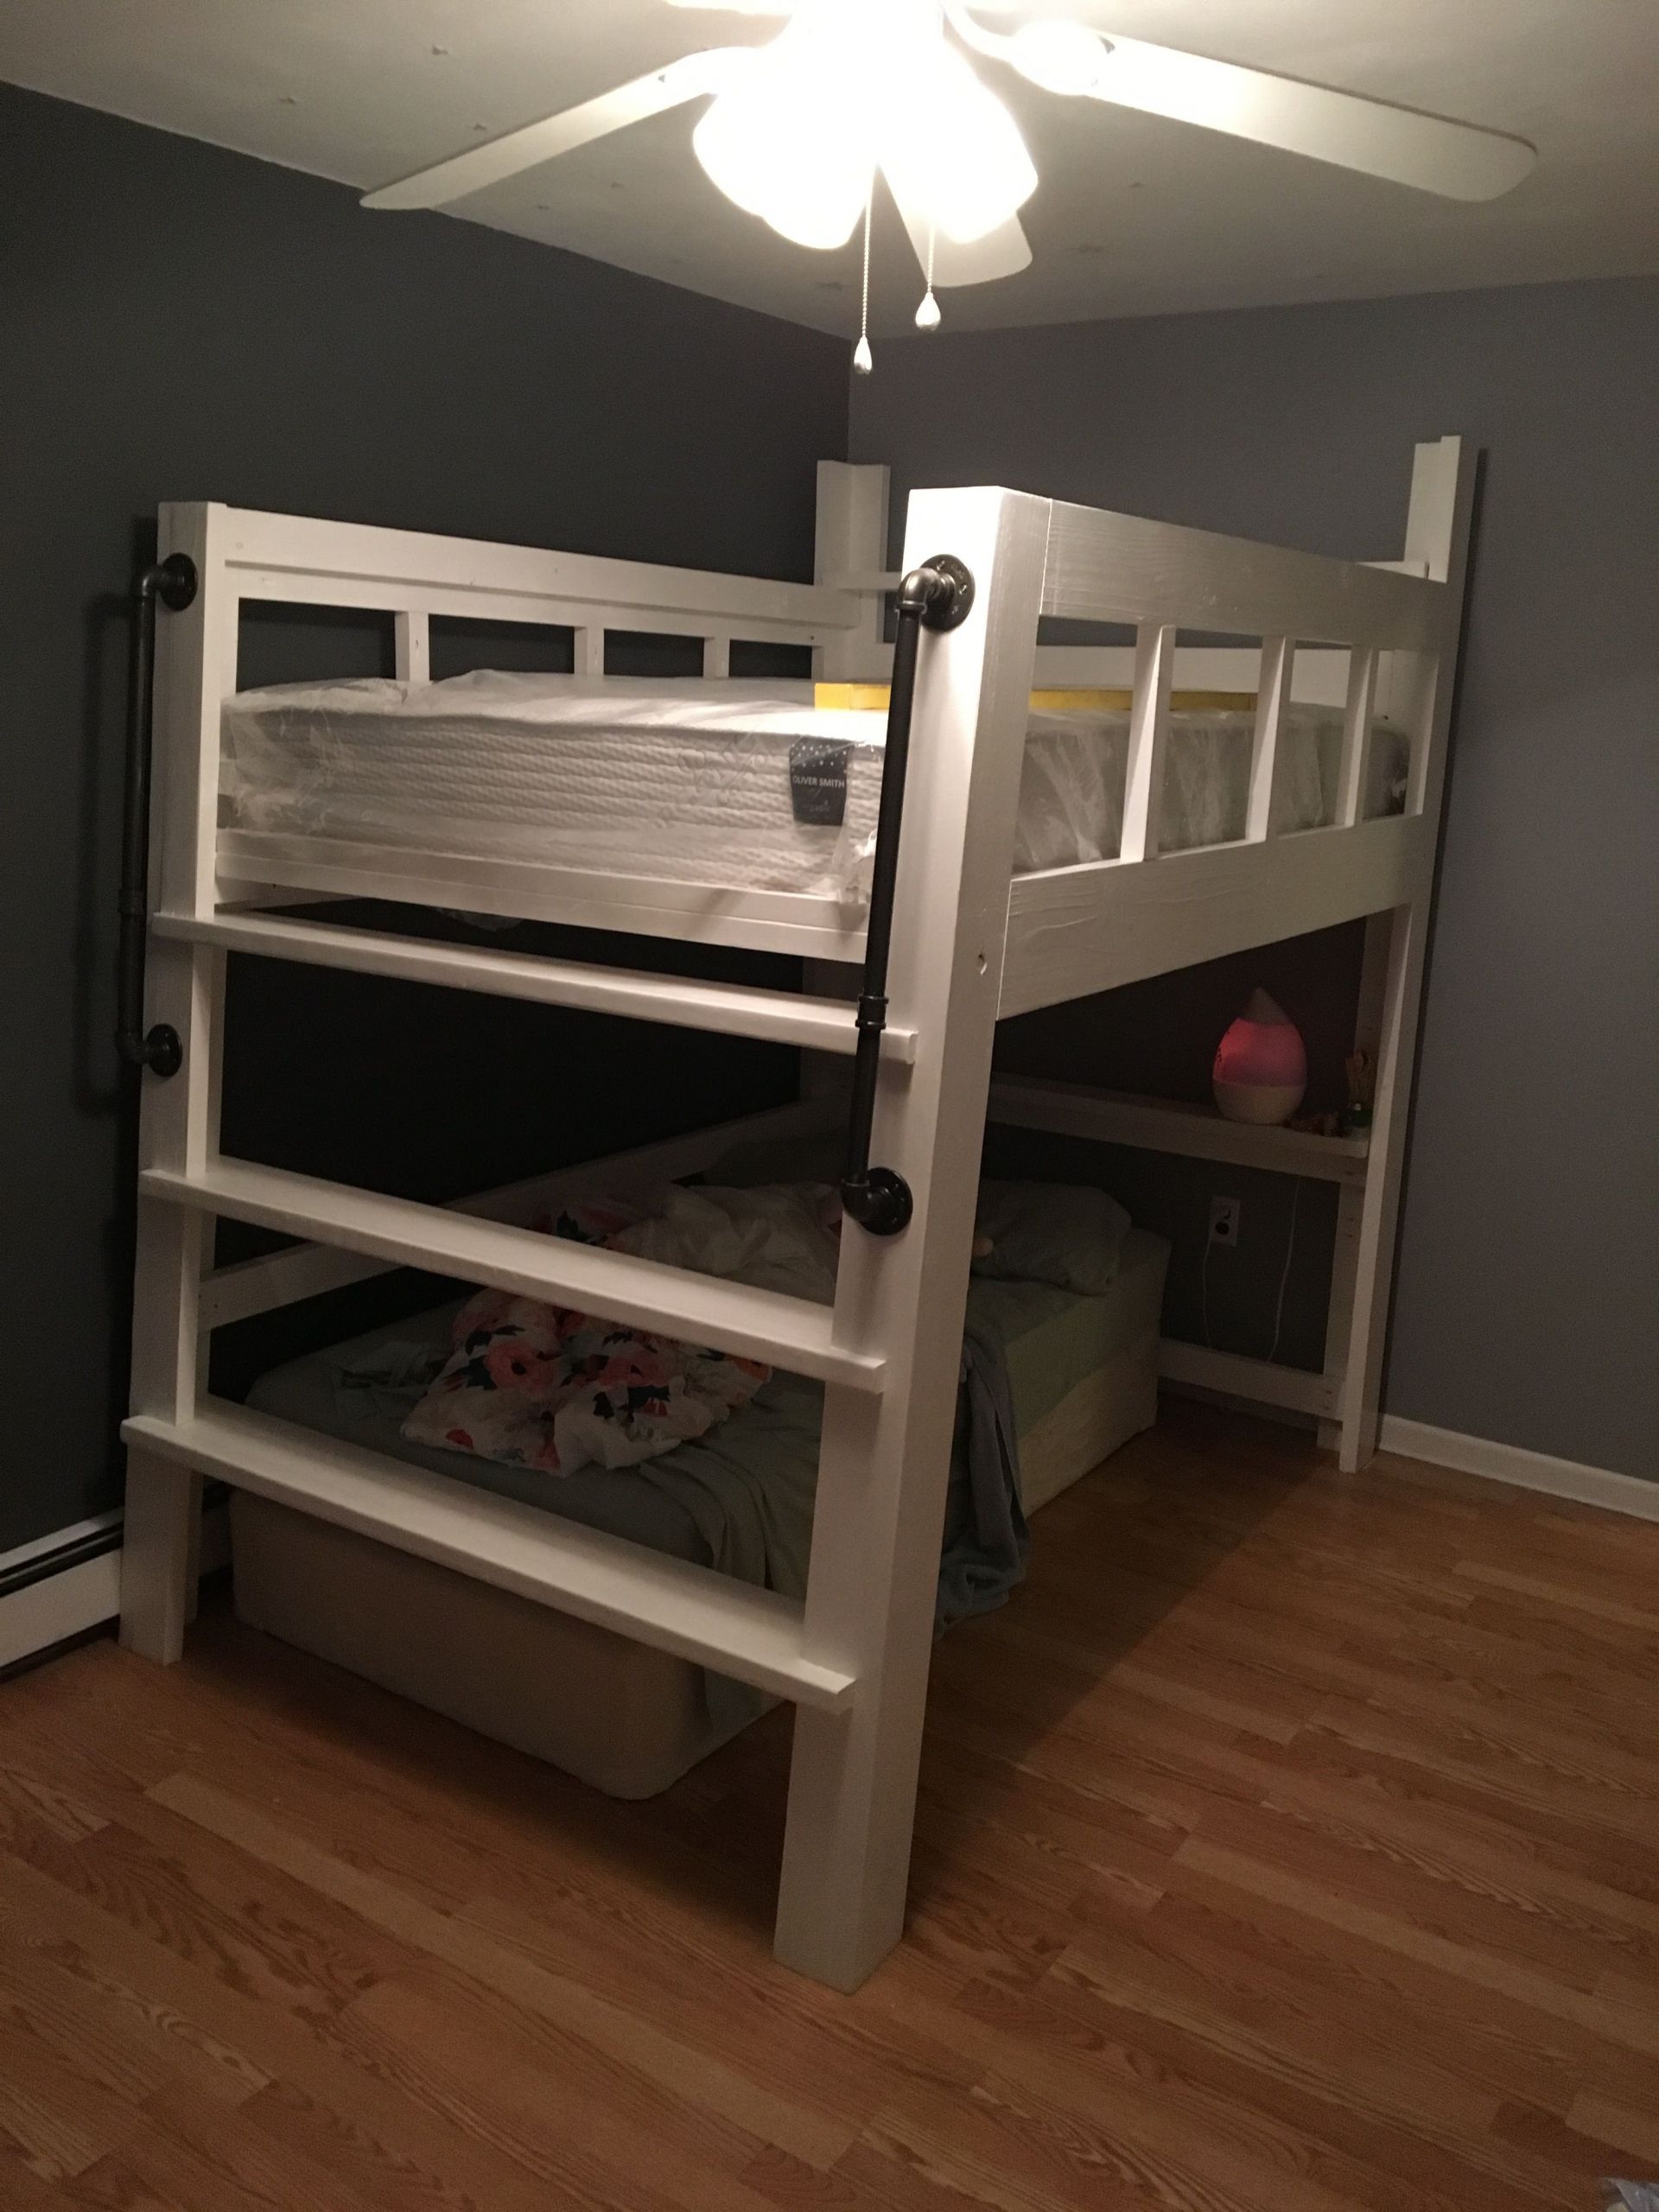 DIY Full Size Loft Bed Plans
 Pin by Vincenzo on North Jersey Woodcraft in 2019